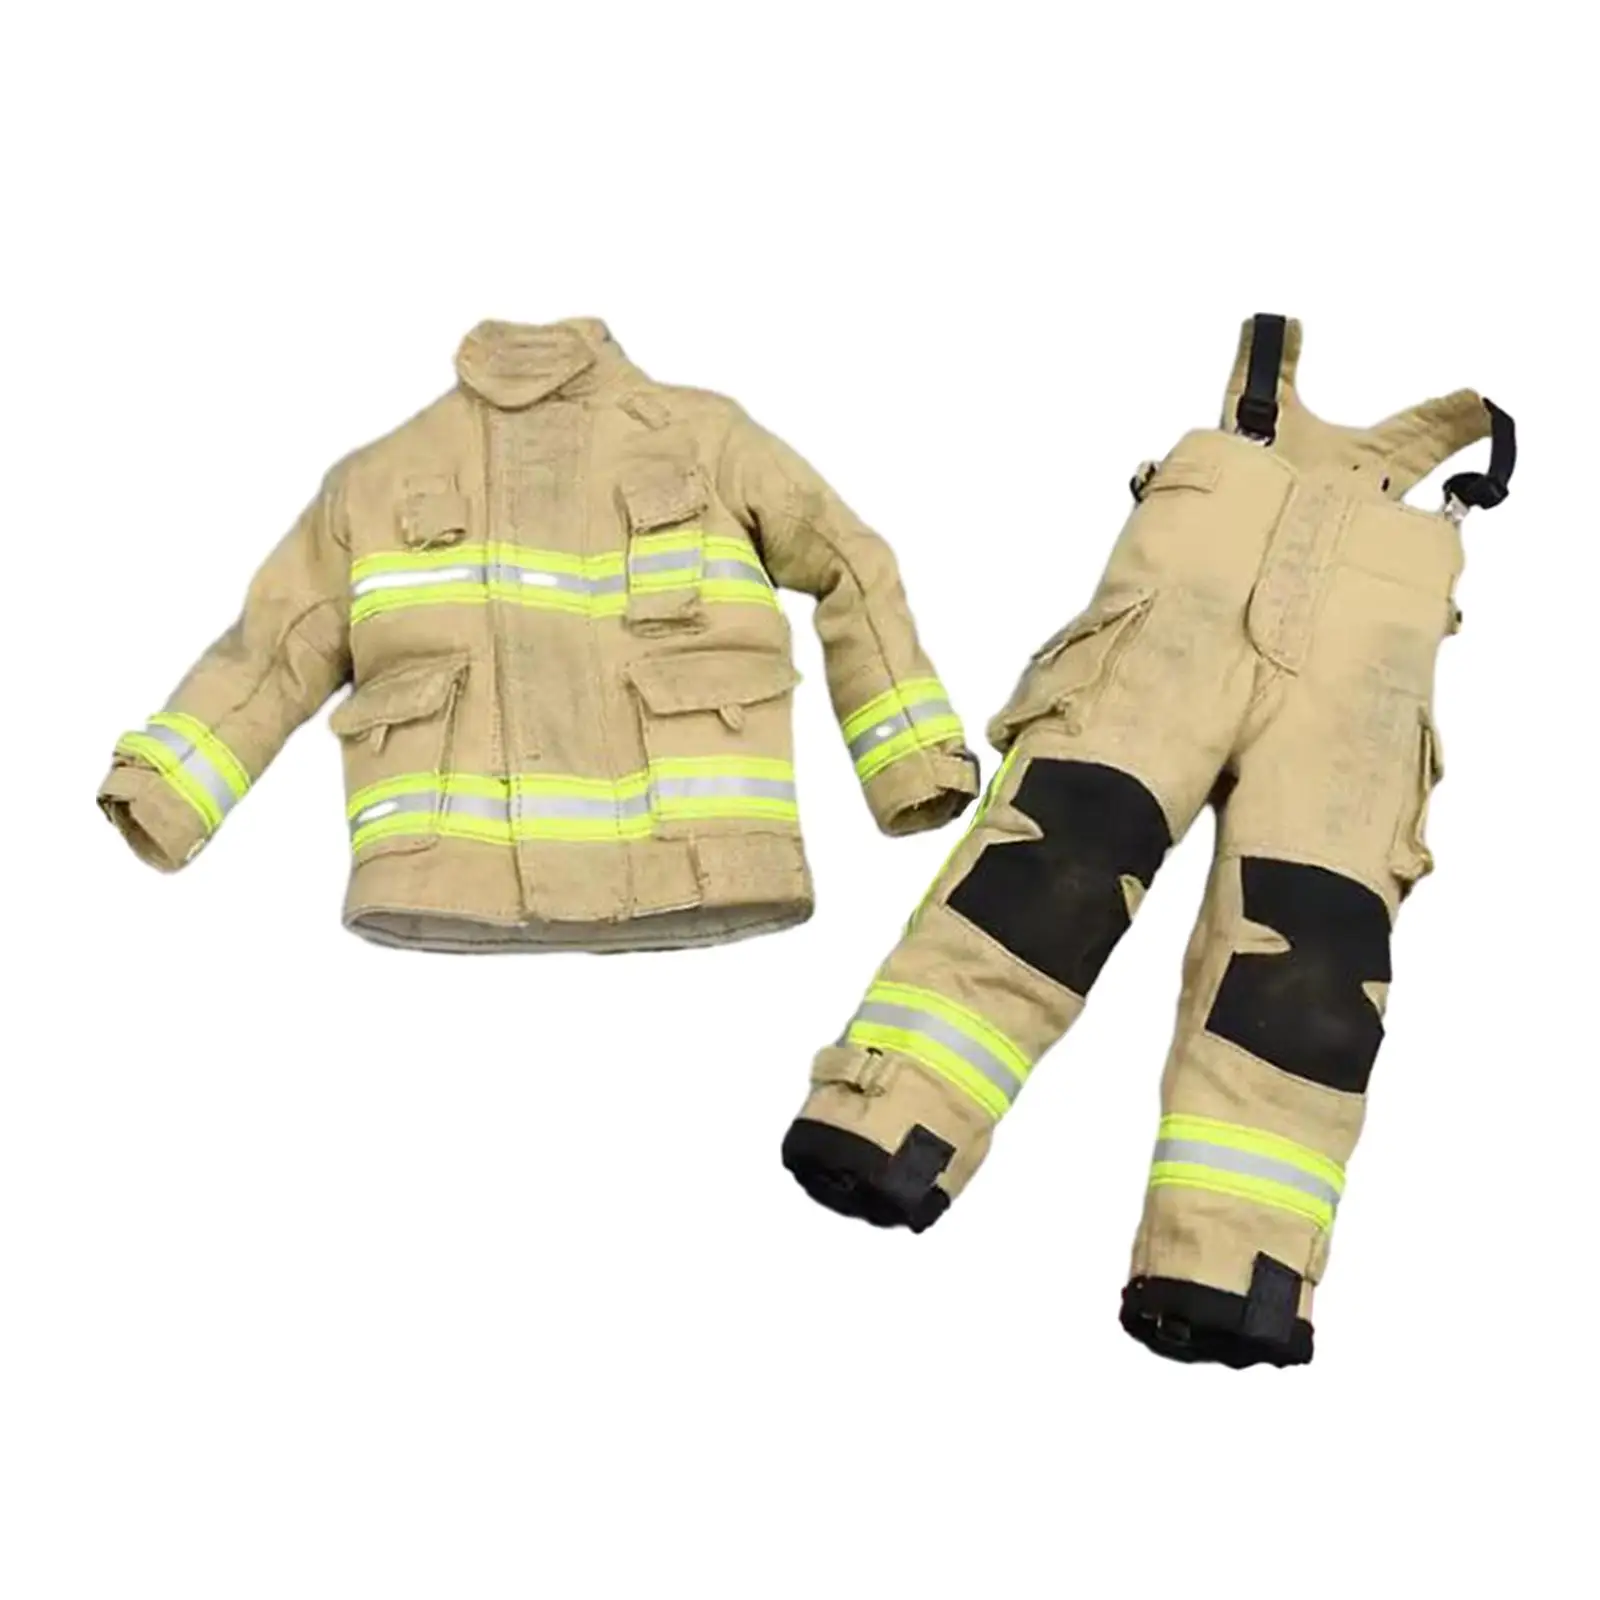 

1/6 Scale Fireman Uniforms Retro Fashion Miniature Clothing Fireman Dress up Set for 12in Doll Model Male Soldiers Figures Accs